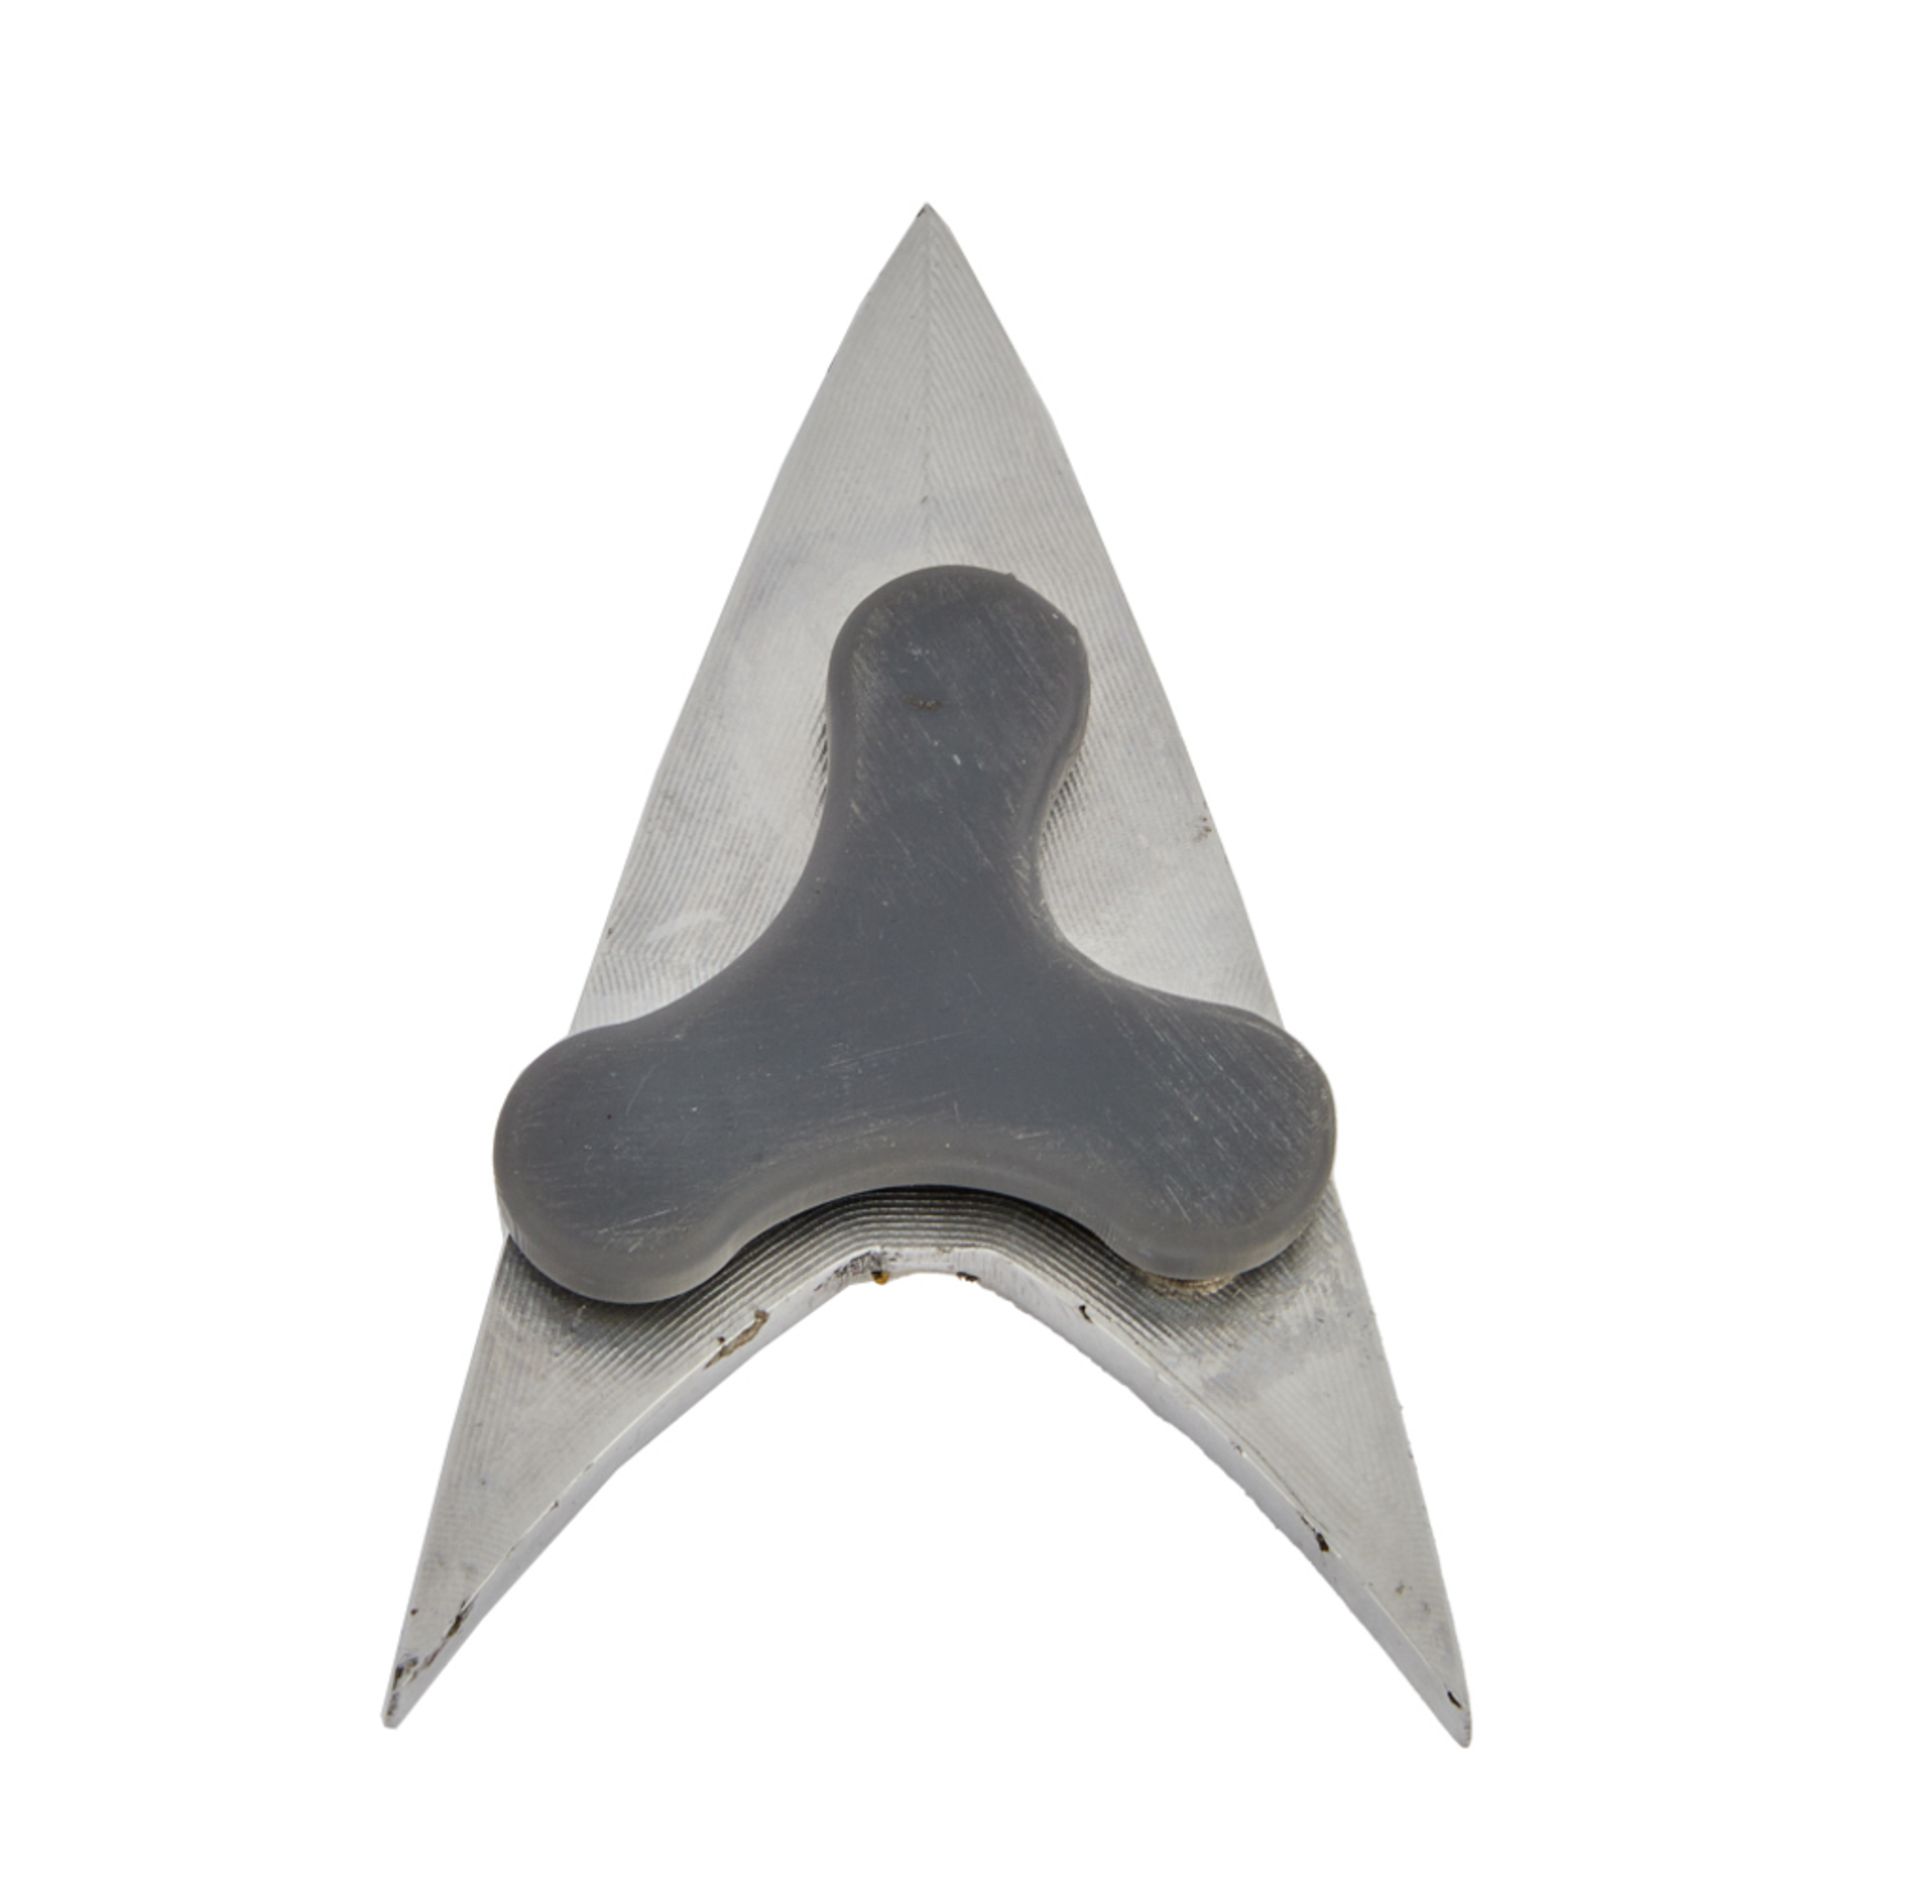 PICARD | PATRICK STEWART "JEAN-LUC PICARD" ALTERNATE TIMELINE HERO COMBADGE PROP (WITH DVD) - Image 2 of 3